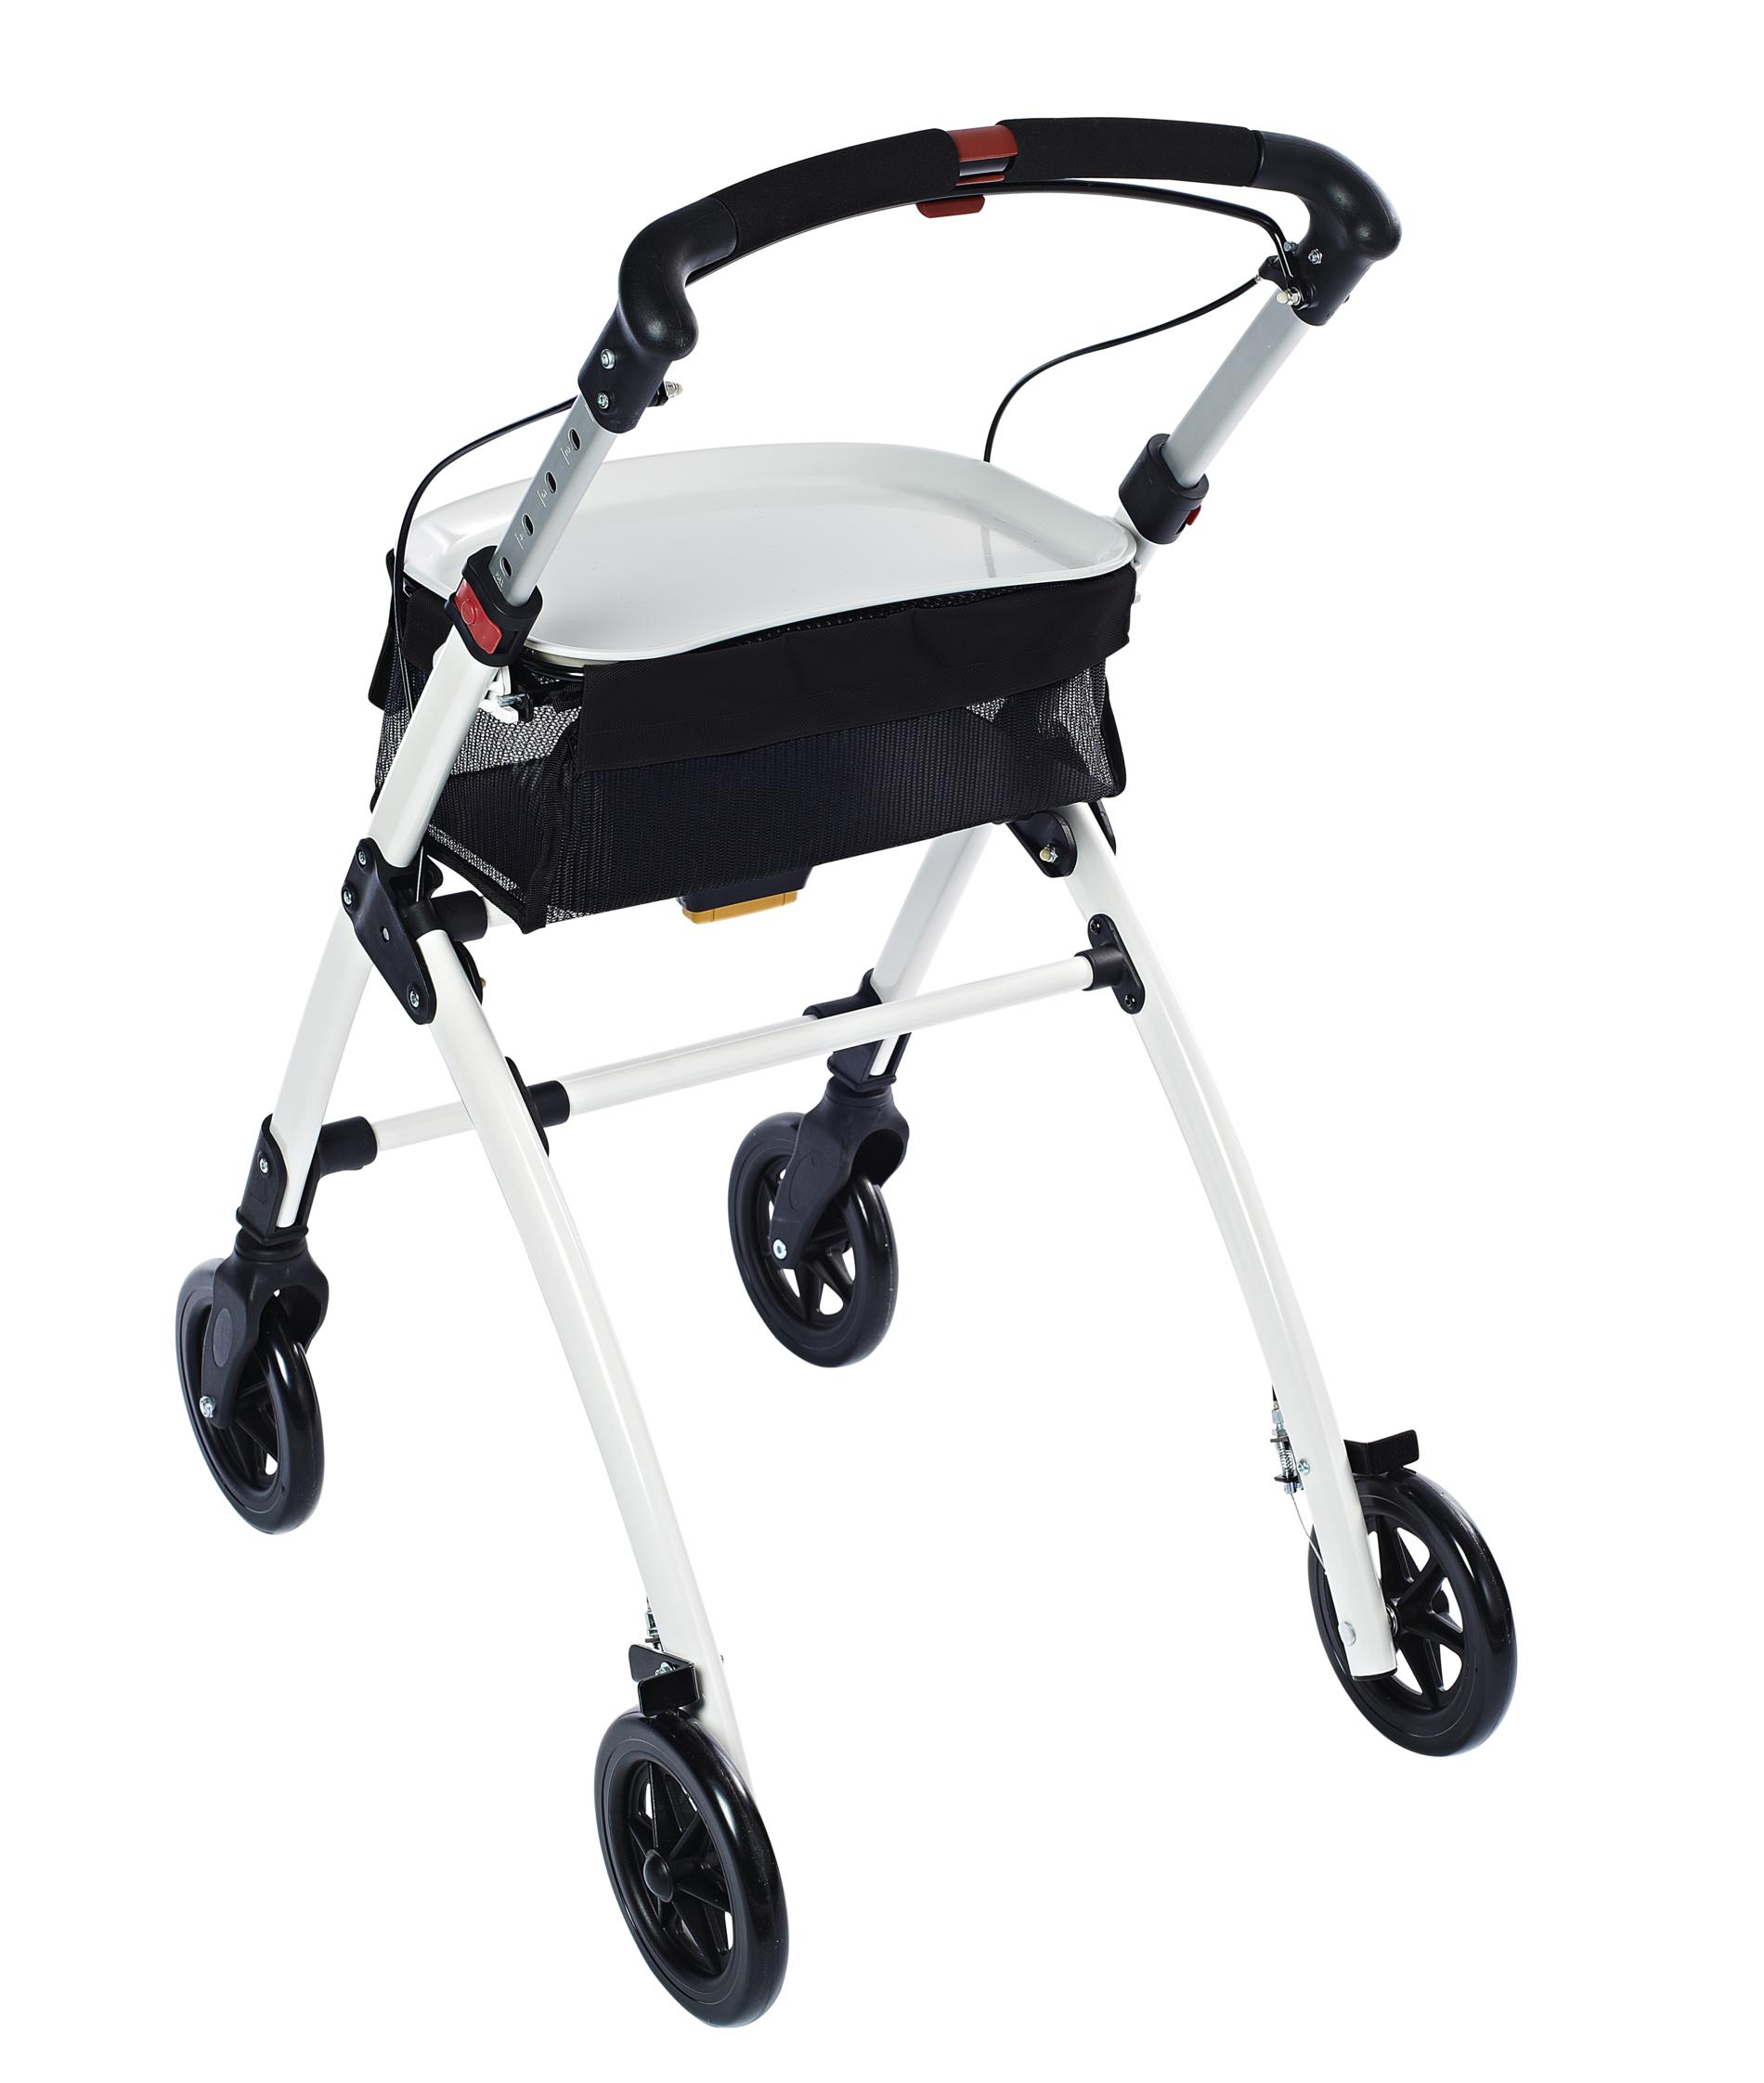 home with - and Indoor Online Ridder rollator the mobile - everyday RIDDER comfortable at Safe,